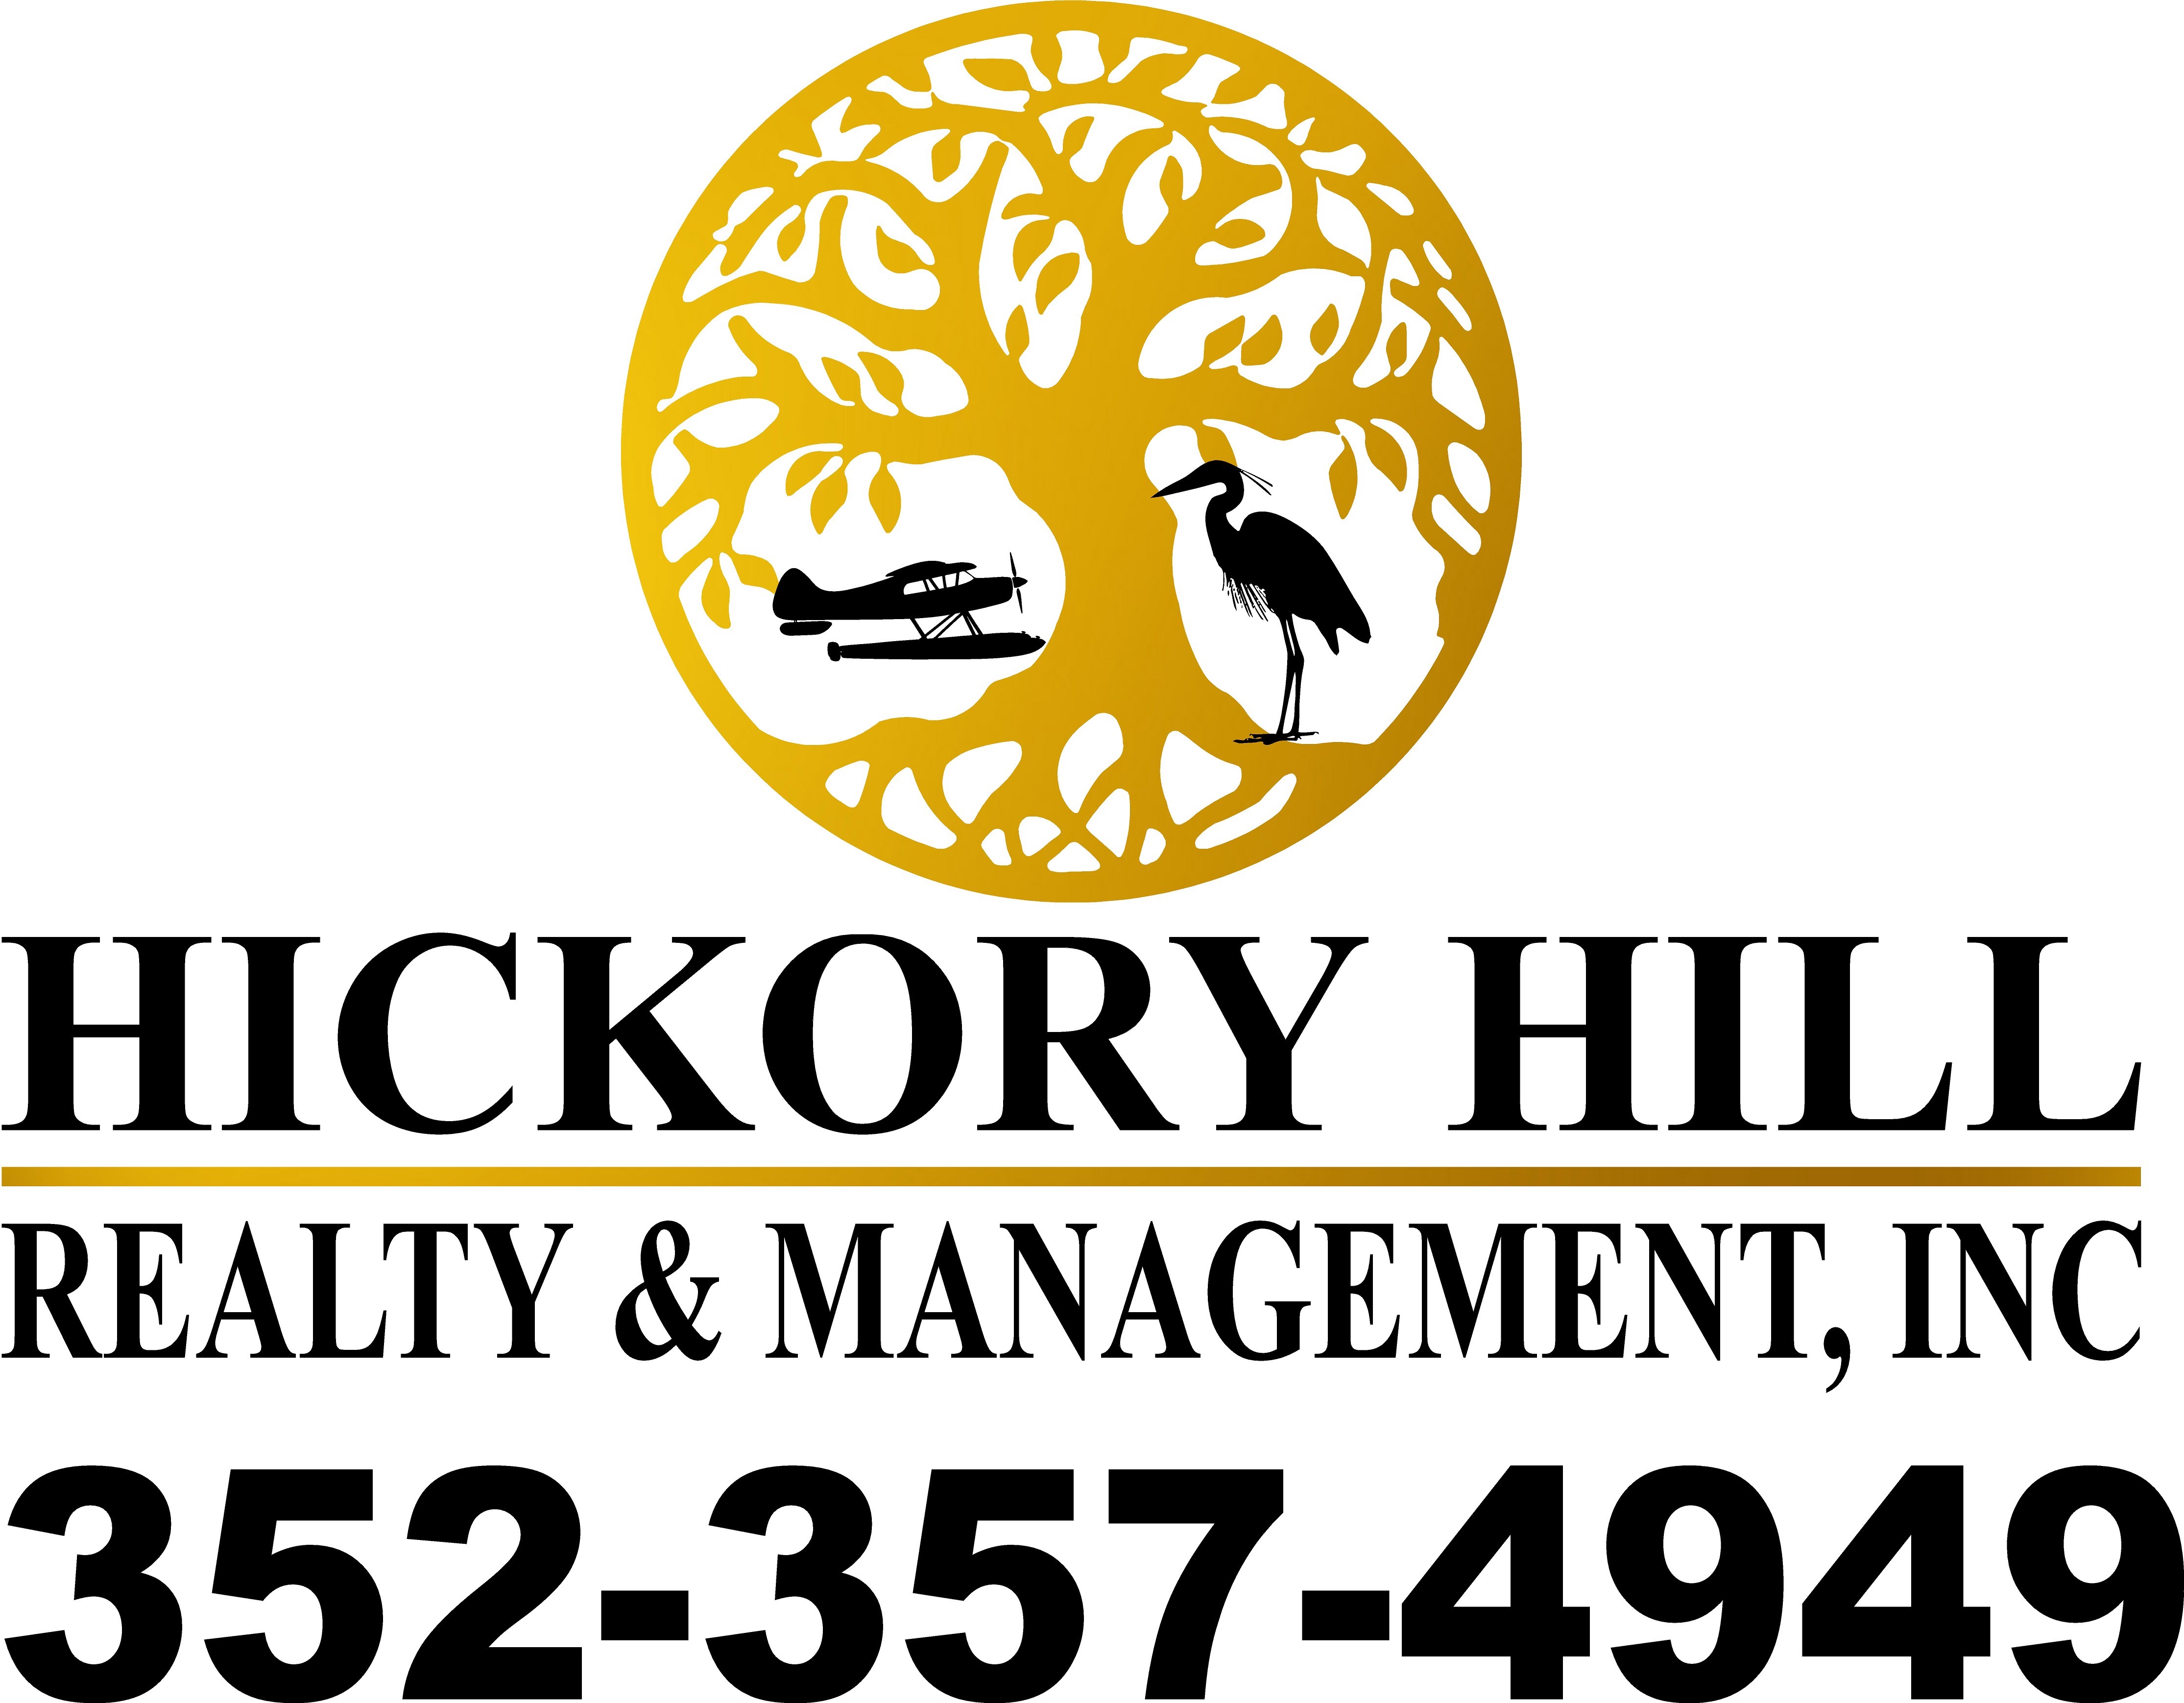 Hickory Hill Realty & Management, Inc.